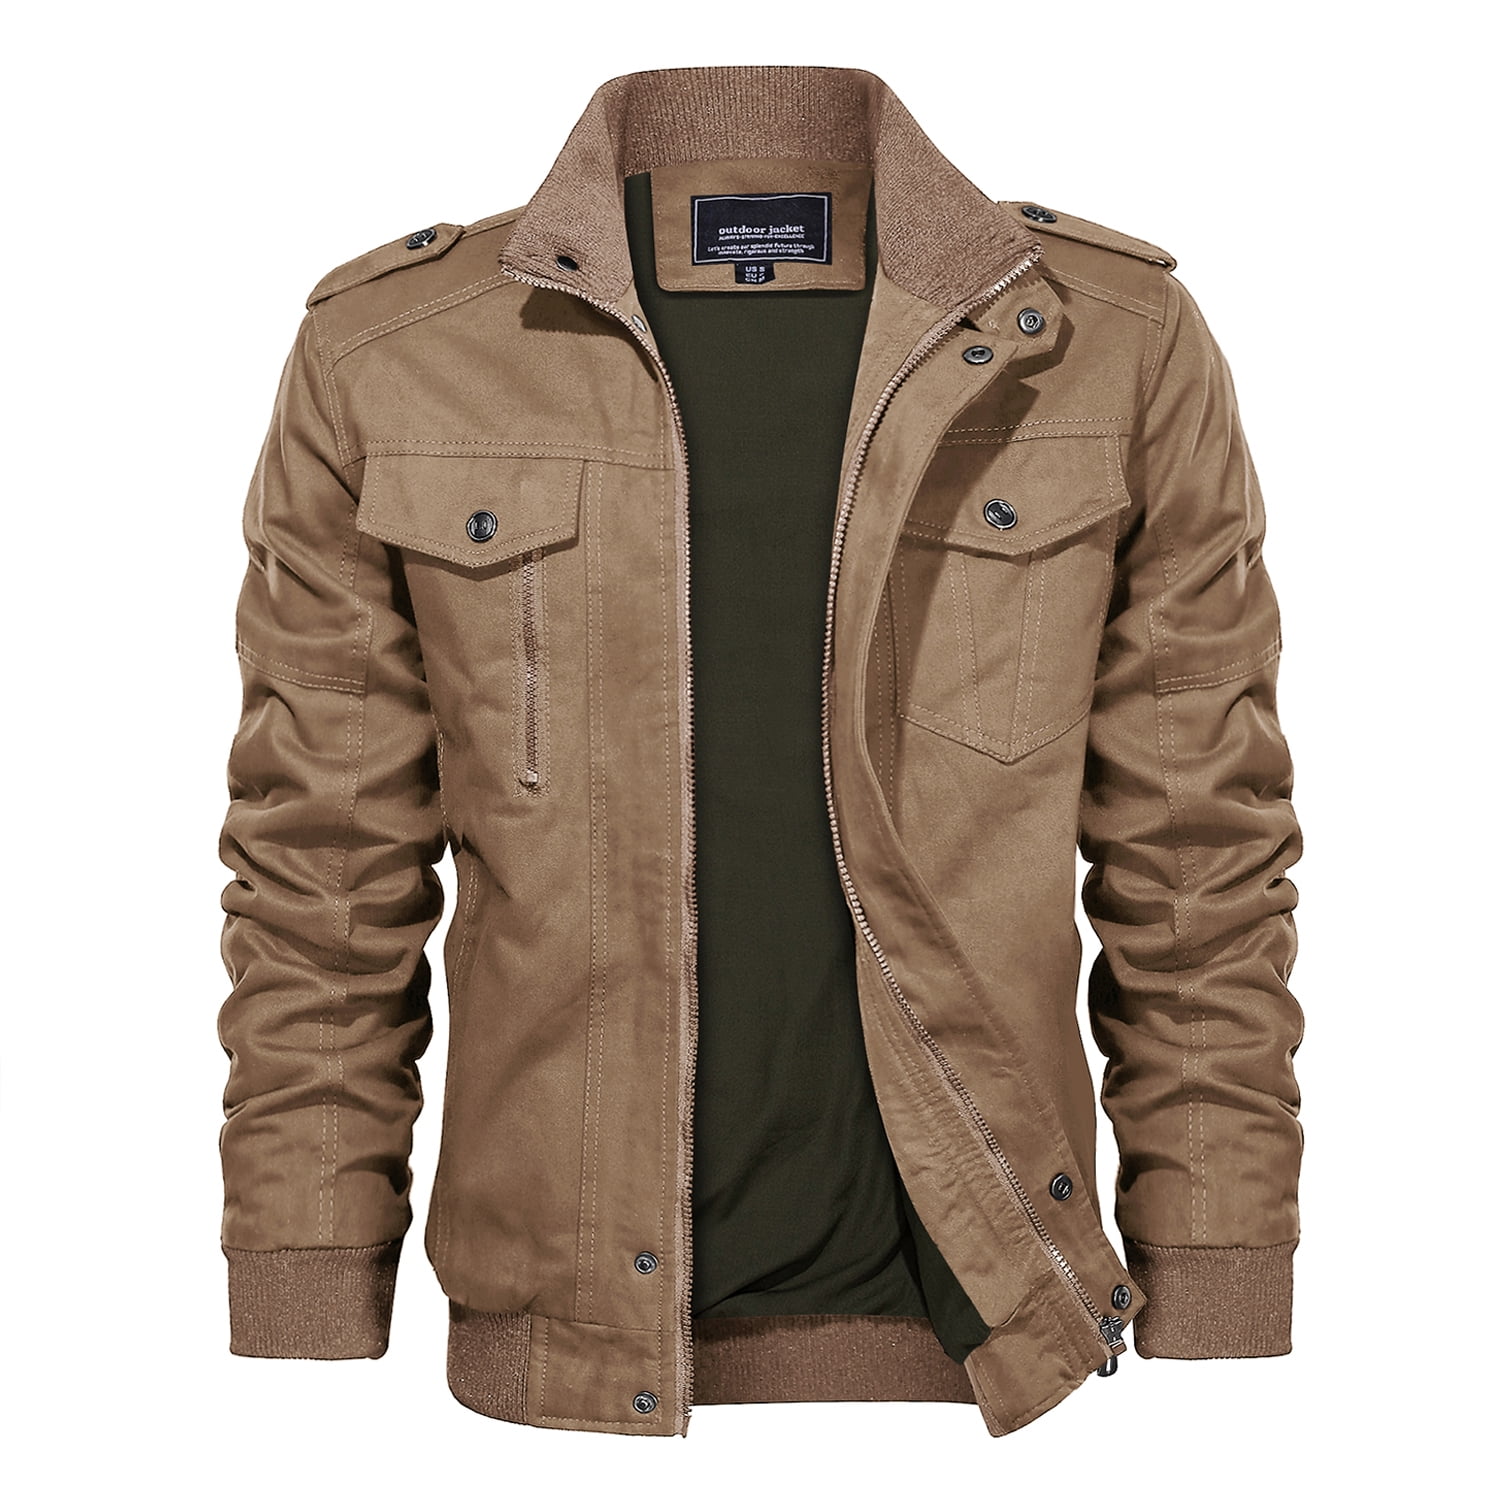 TACVASEN Mens Jacket-Military Casual Cotton Lightweight Full Zip Spring Fall Outwear Coat 